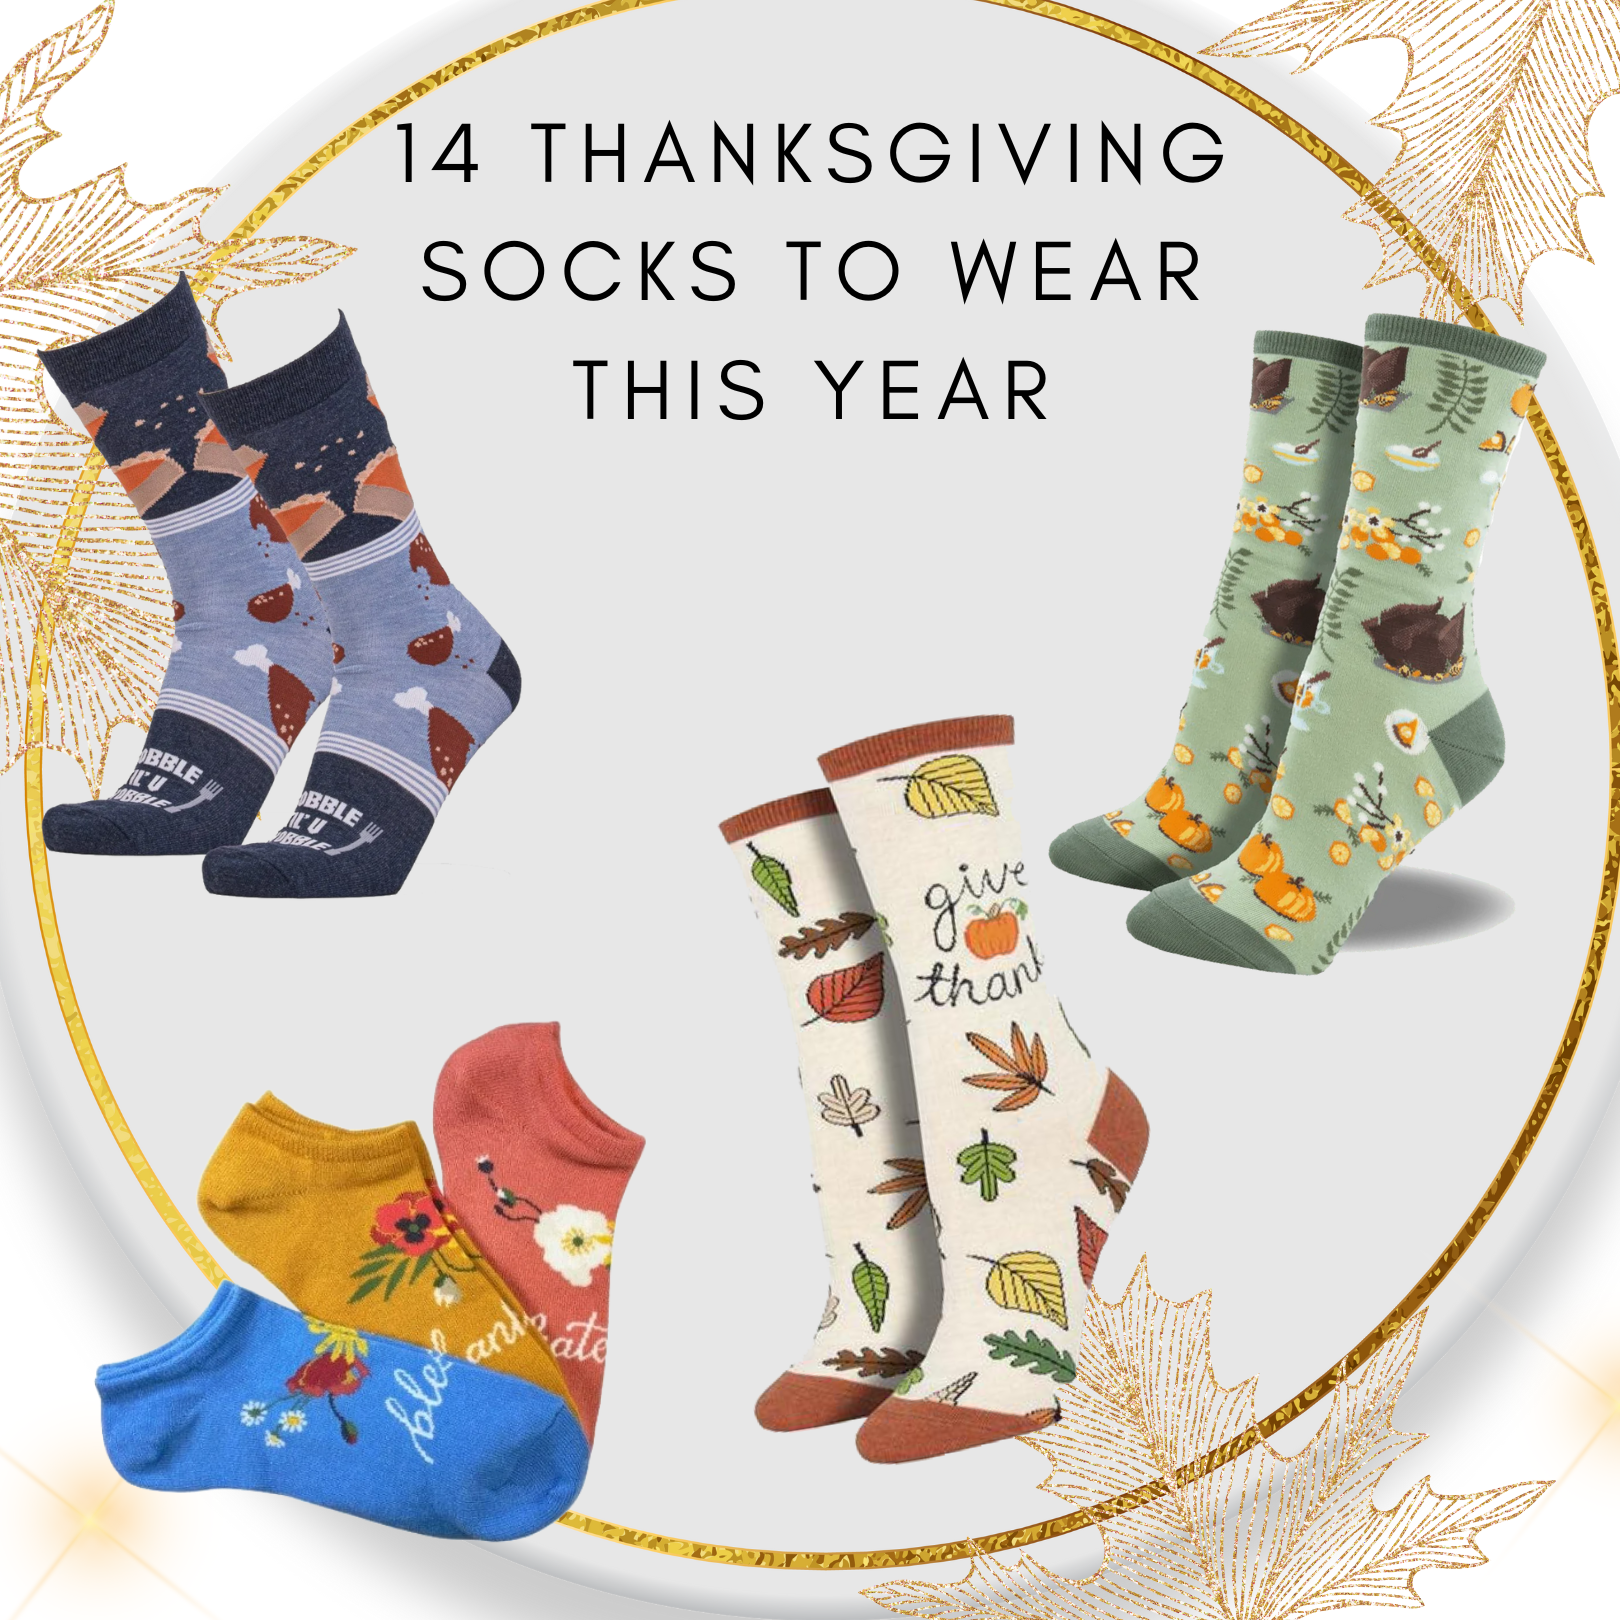 14 Thanksgiving Socks To Wear This Year